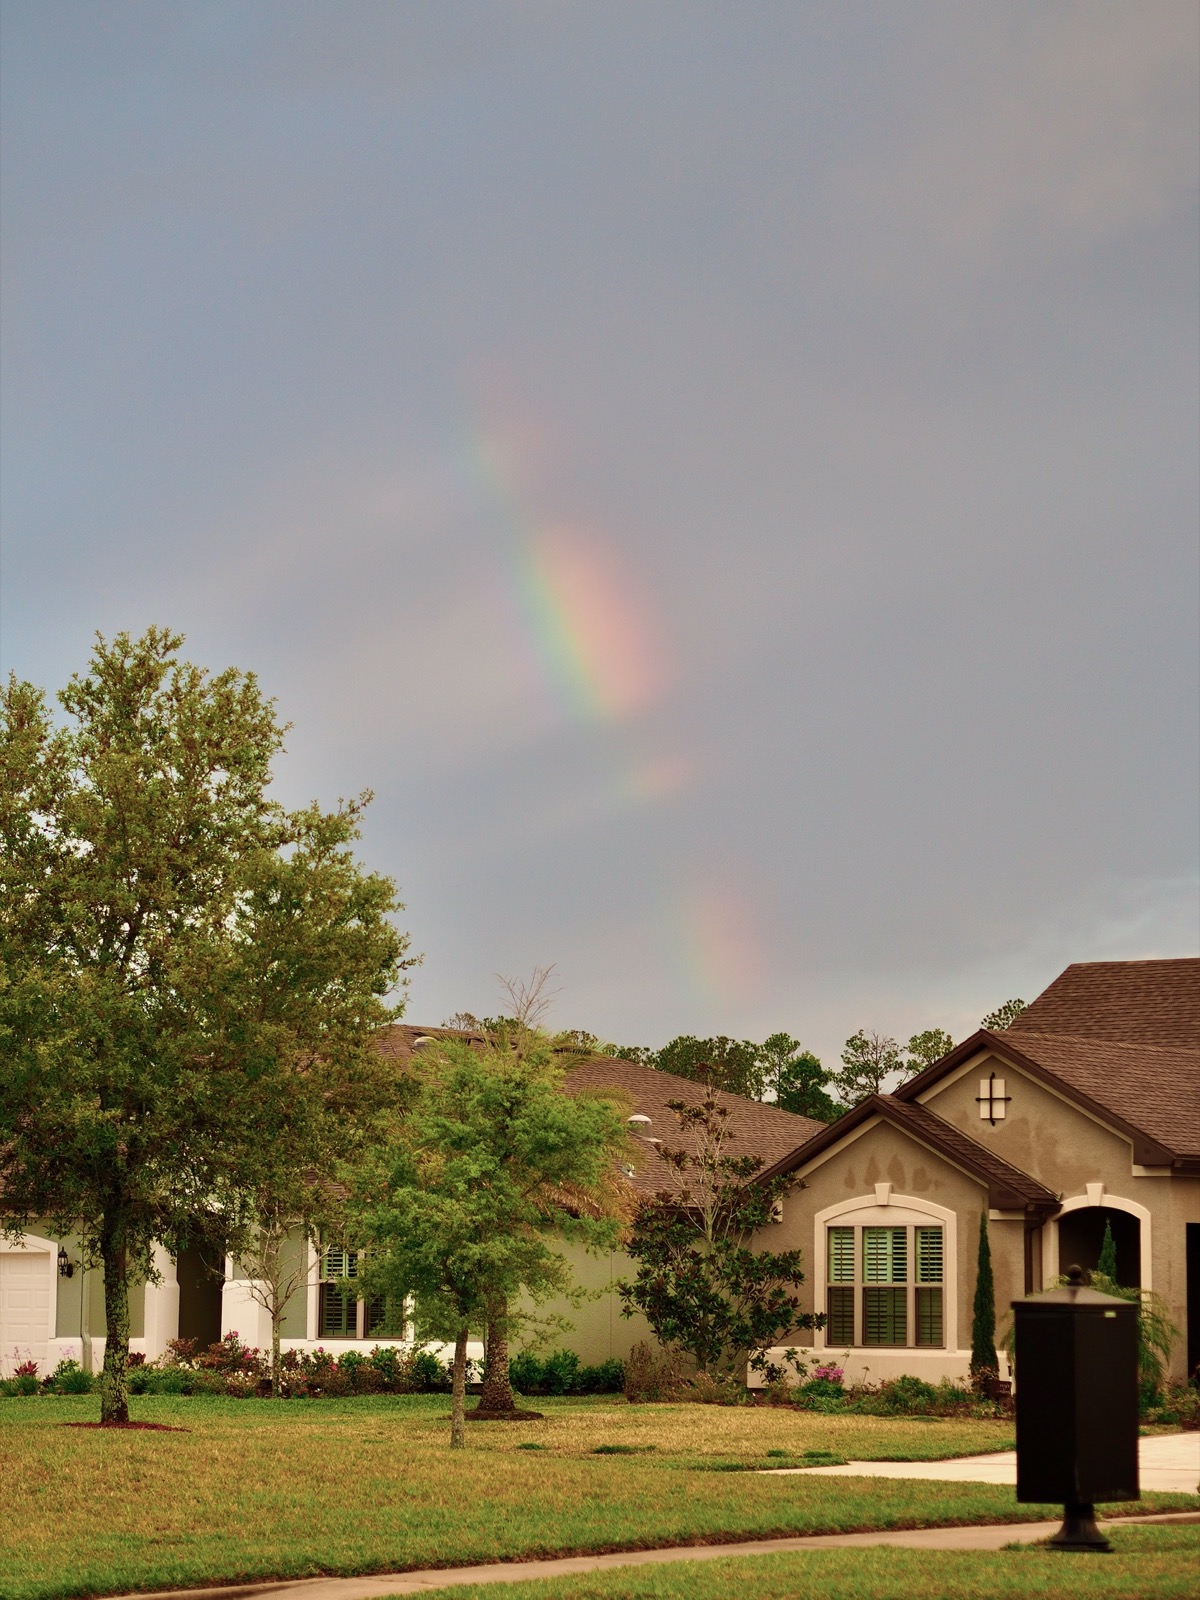 Fragments of a rainbow interrupted by clouds rising from a suburban landscape.